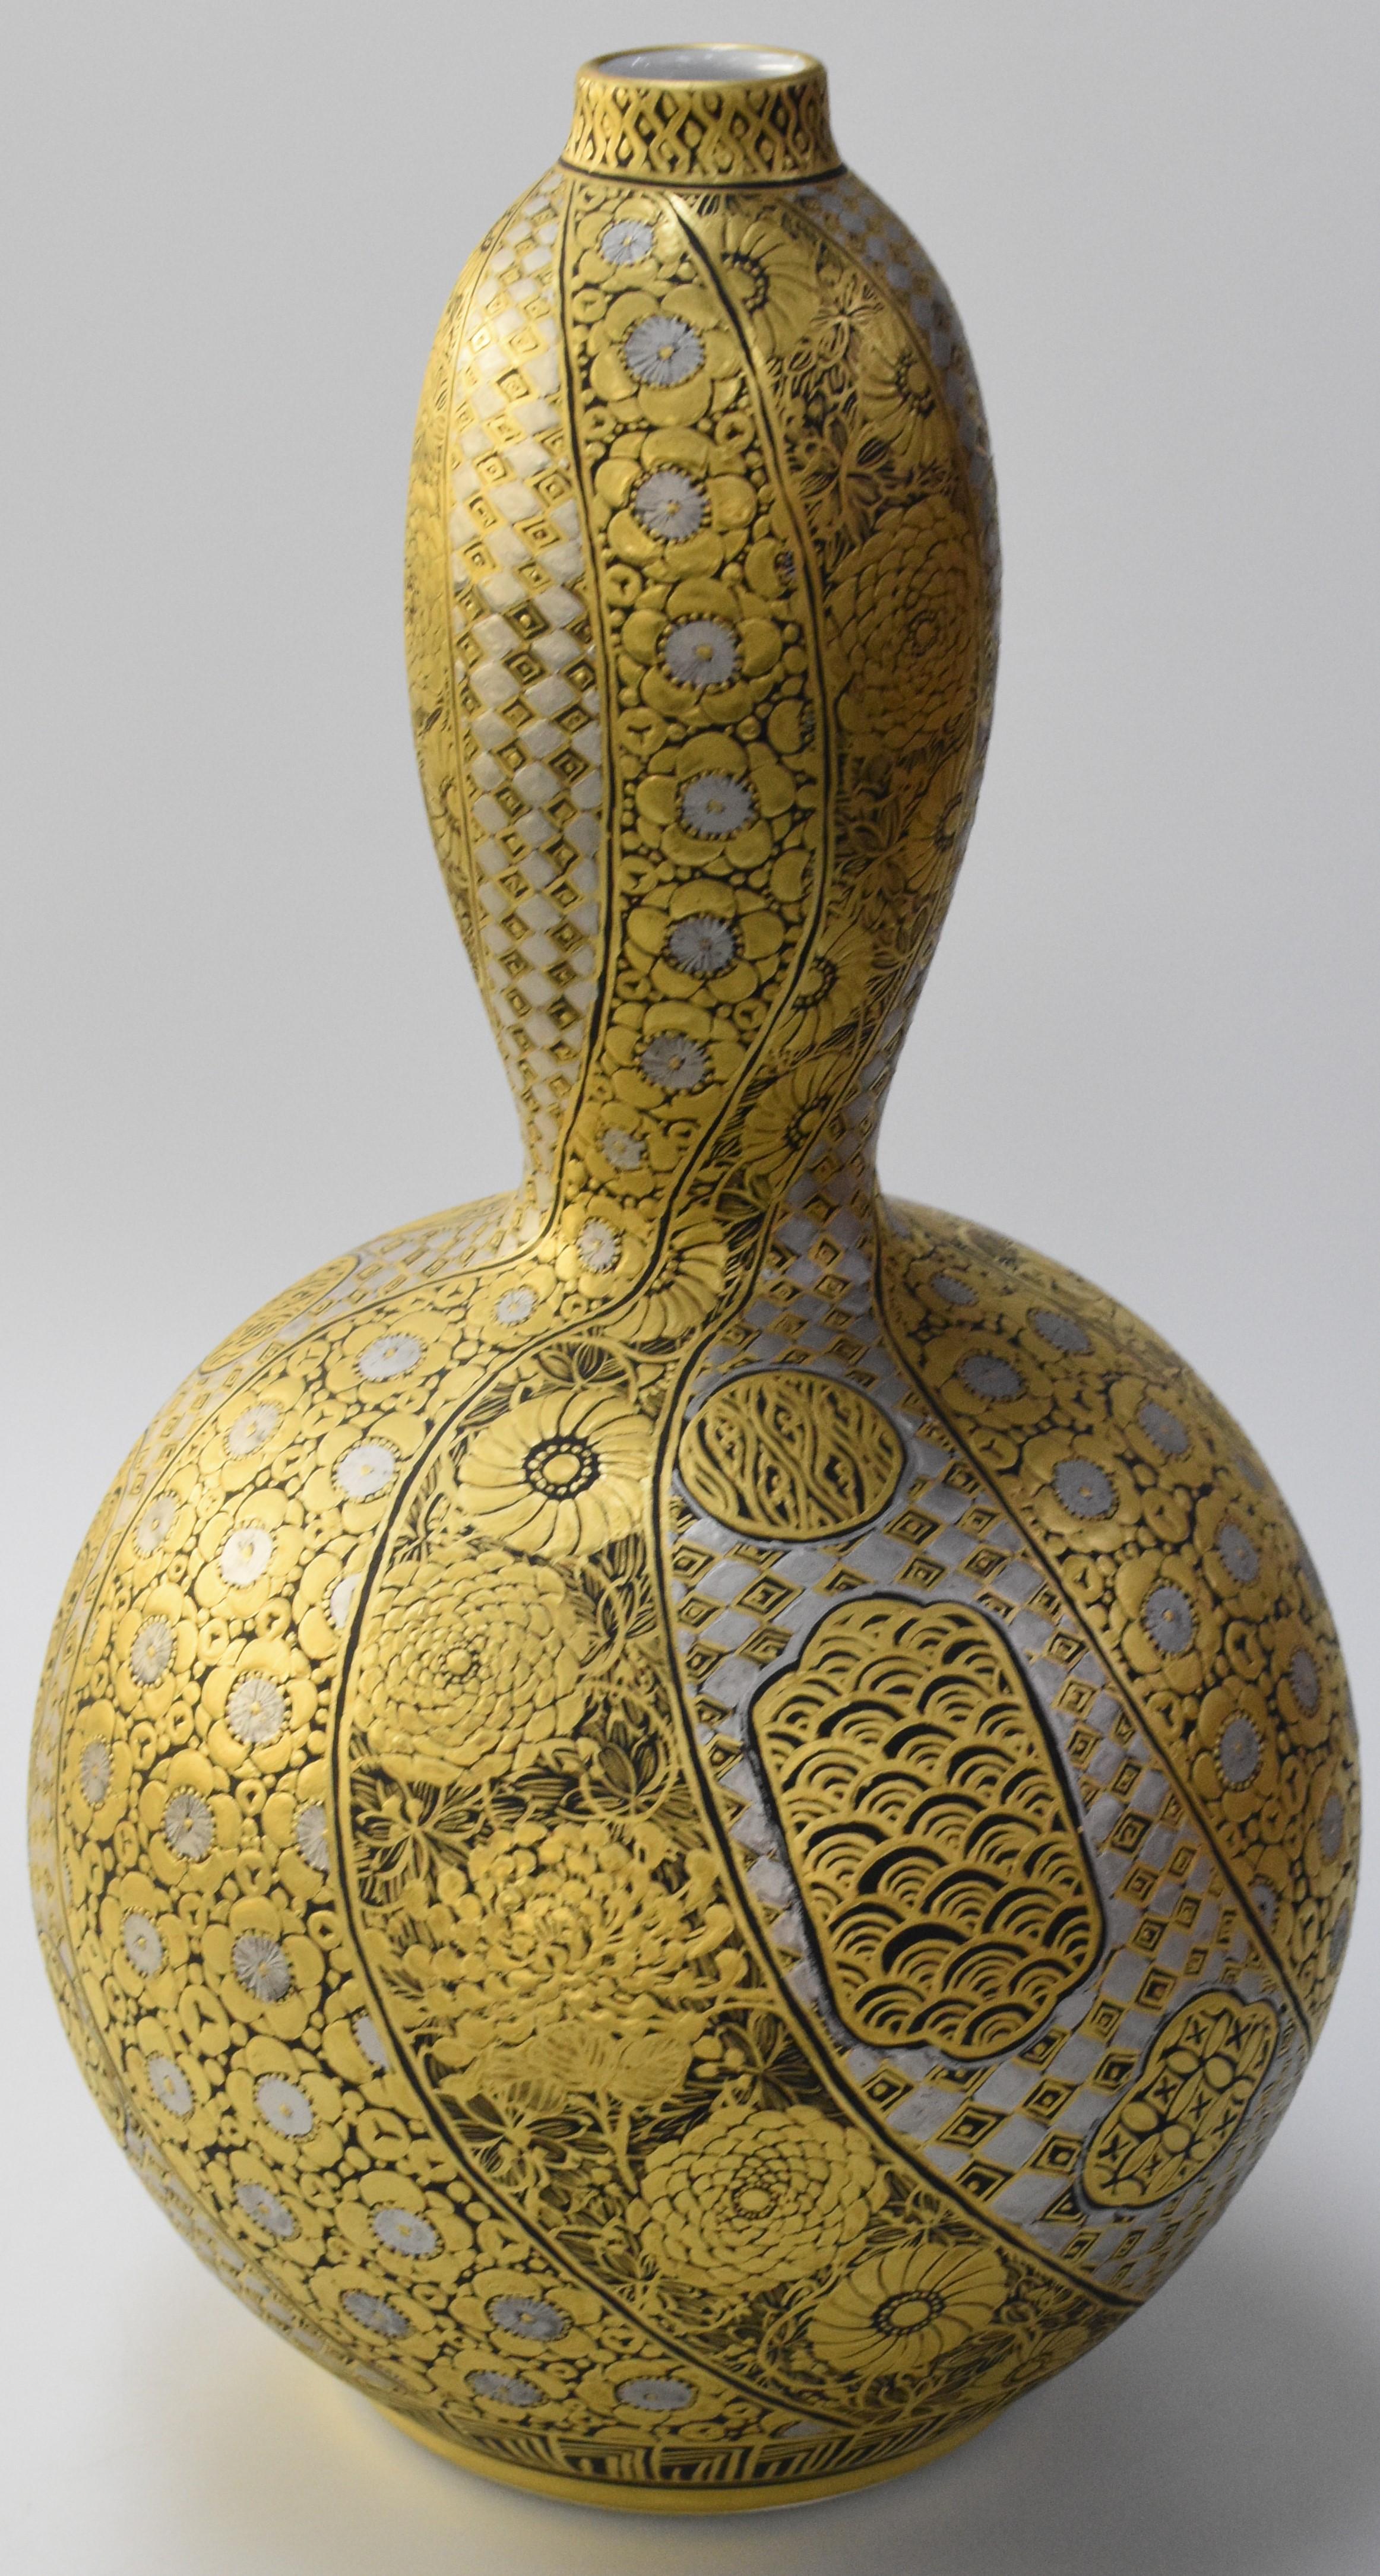 Extraordinary museum-quality Japanese contemporary porcelain vase extremely intricately hand-painted with high purity gold and platinum on a stunning auspicious double gourd porcelain body in black and white, creating mesmerizing flower and